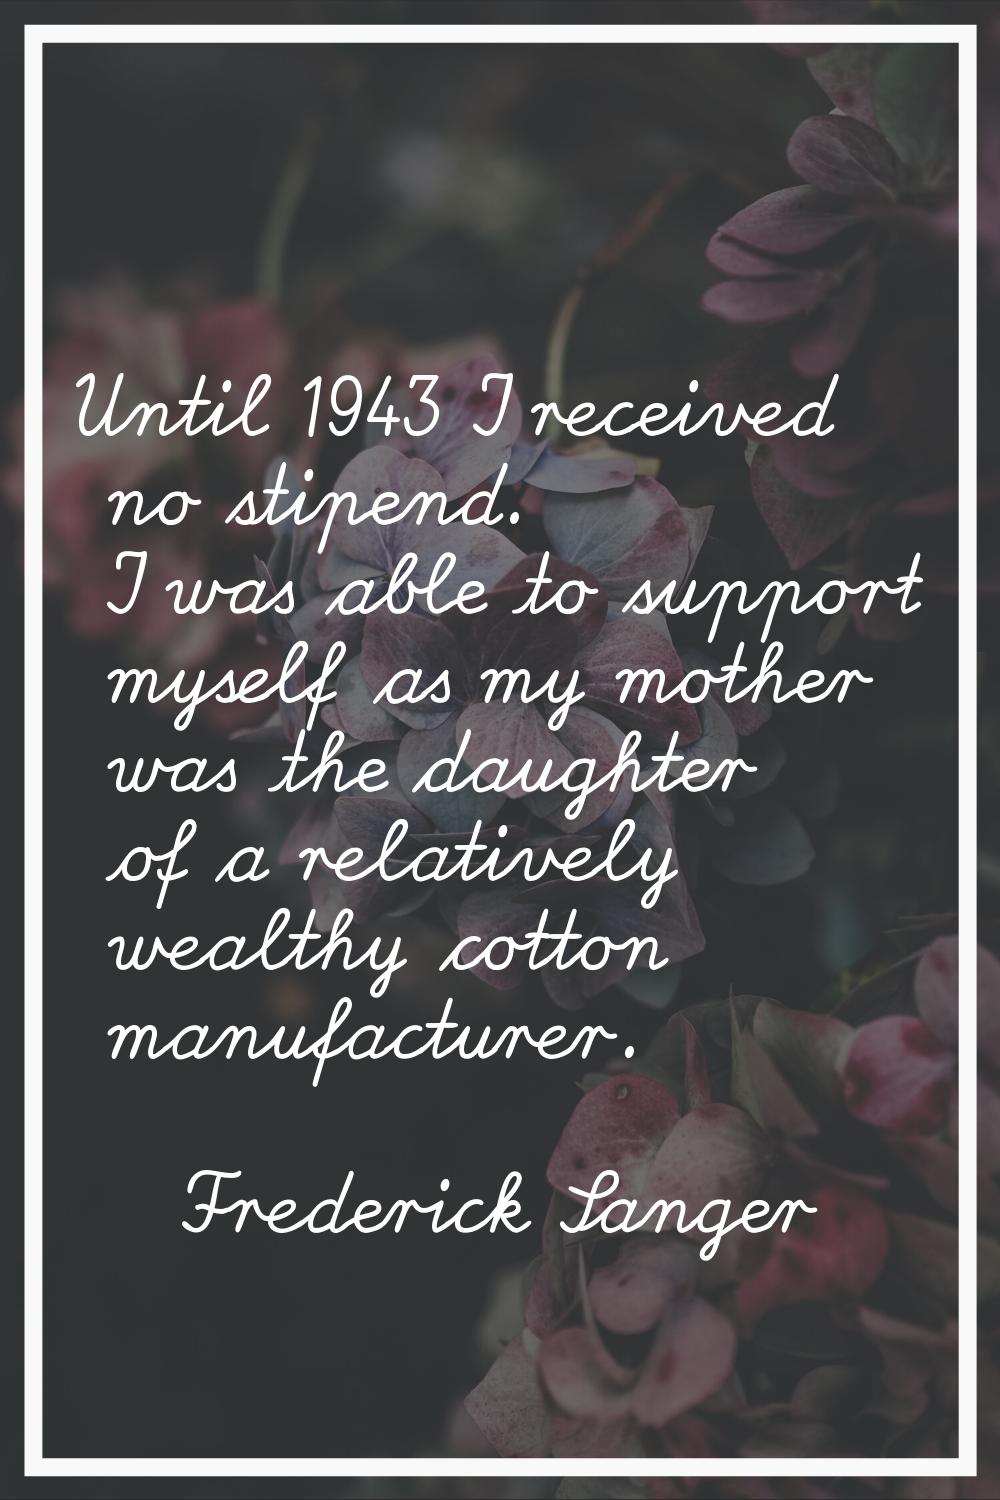 Until 1943 I received no stipend. I was able to support myself as my mother was the daughter of a r